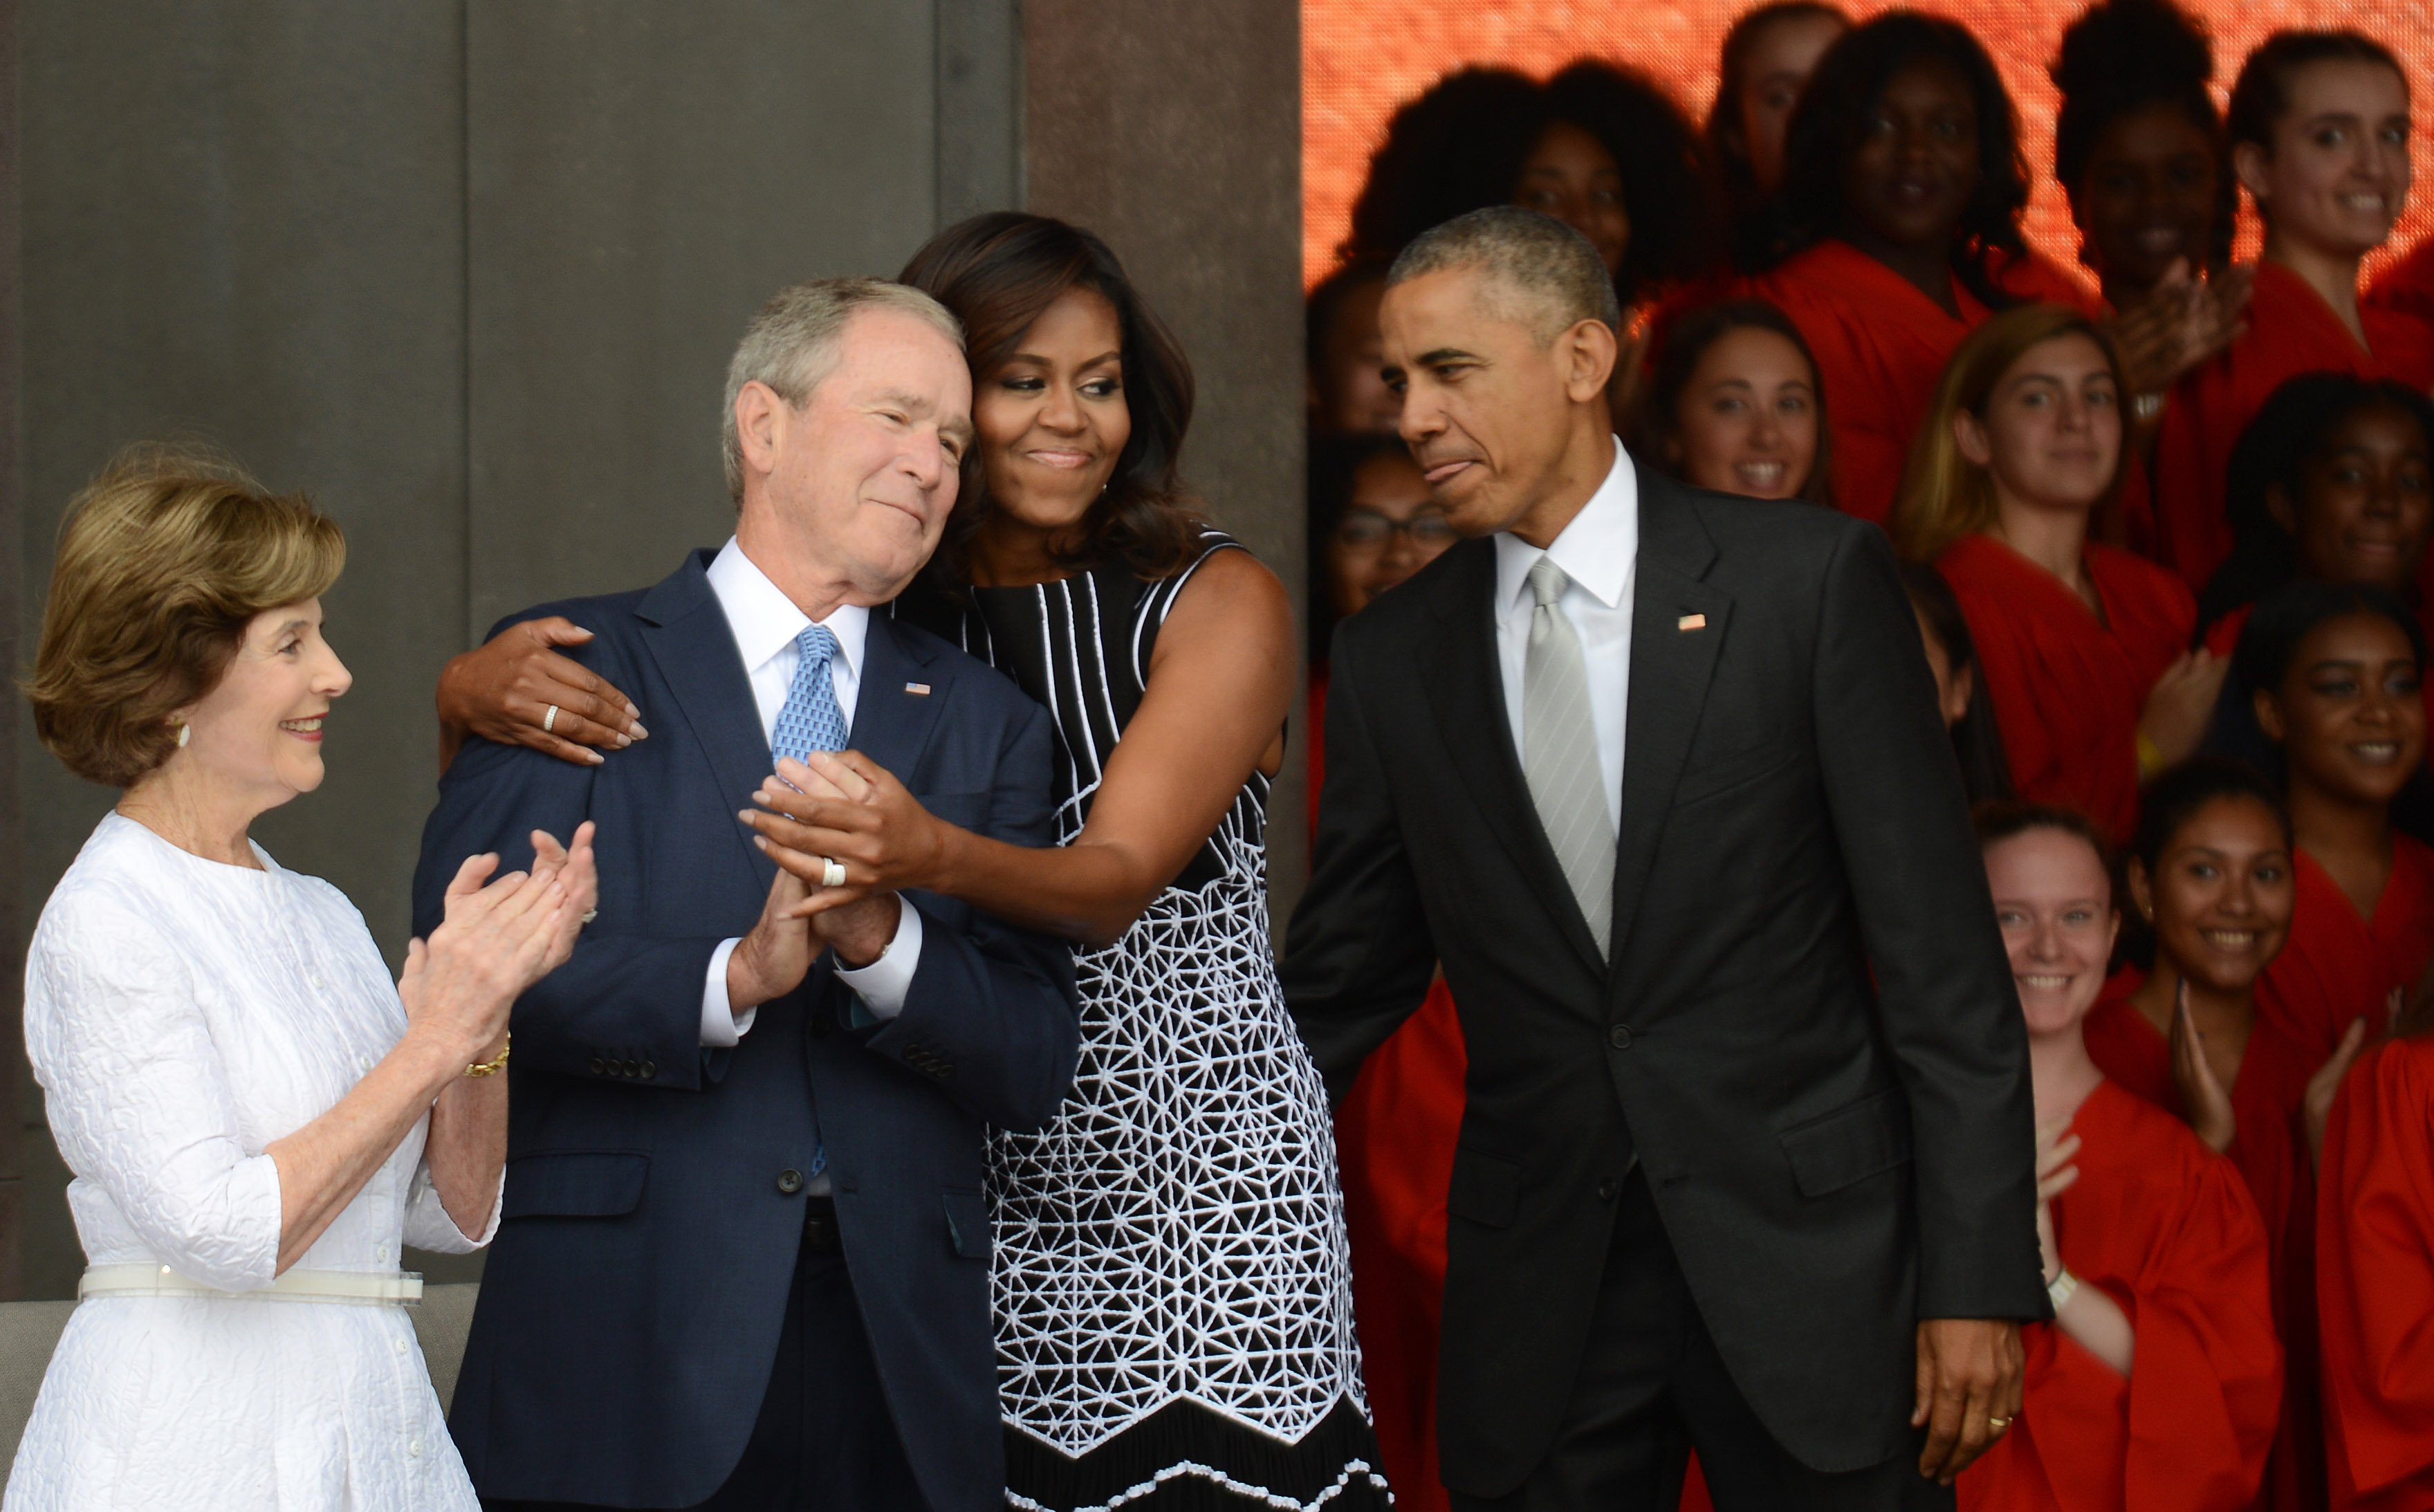 Barack Obama and George W. Bush with wives Michelle Obama and Laura Bush at the dedication of the National Museum of African American History and Culture | Photo: Getty Images